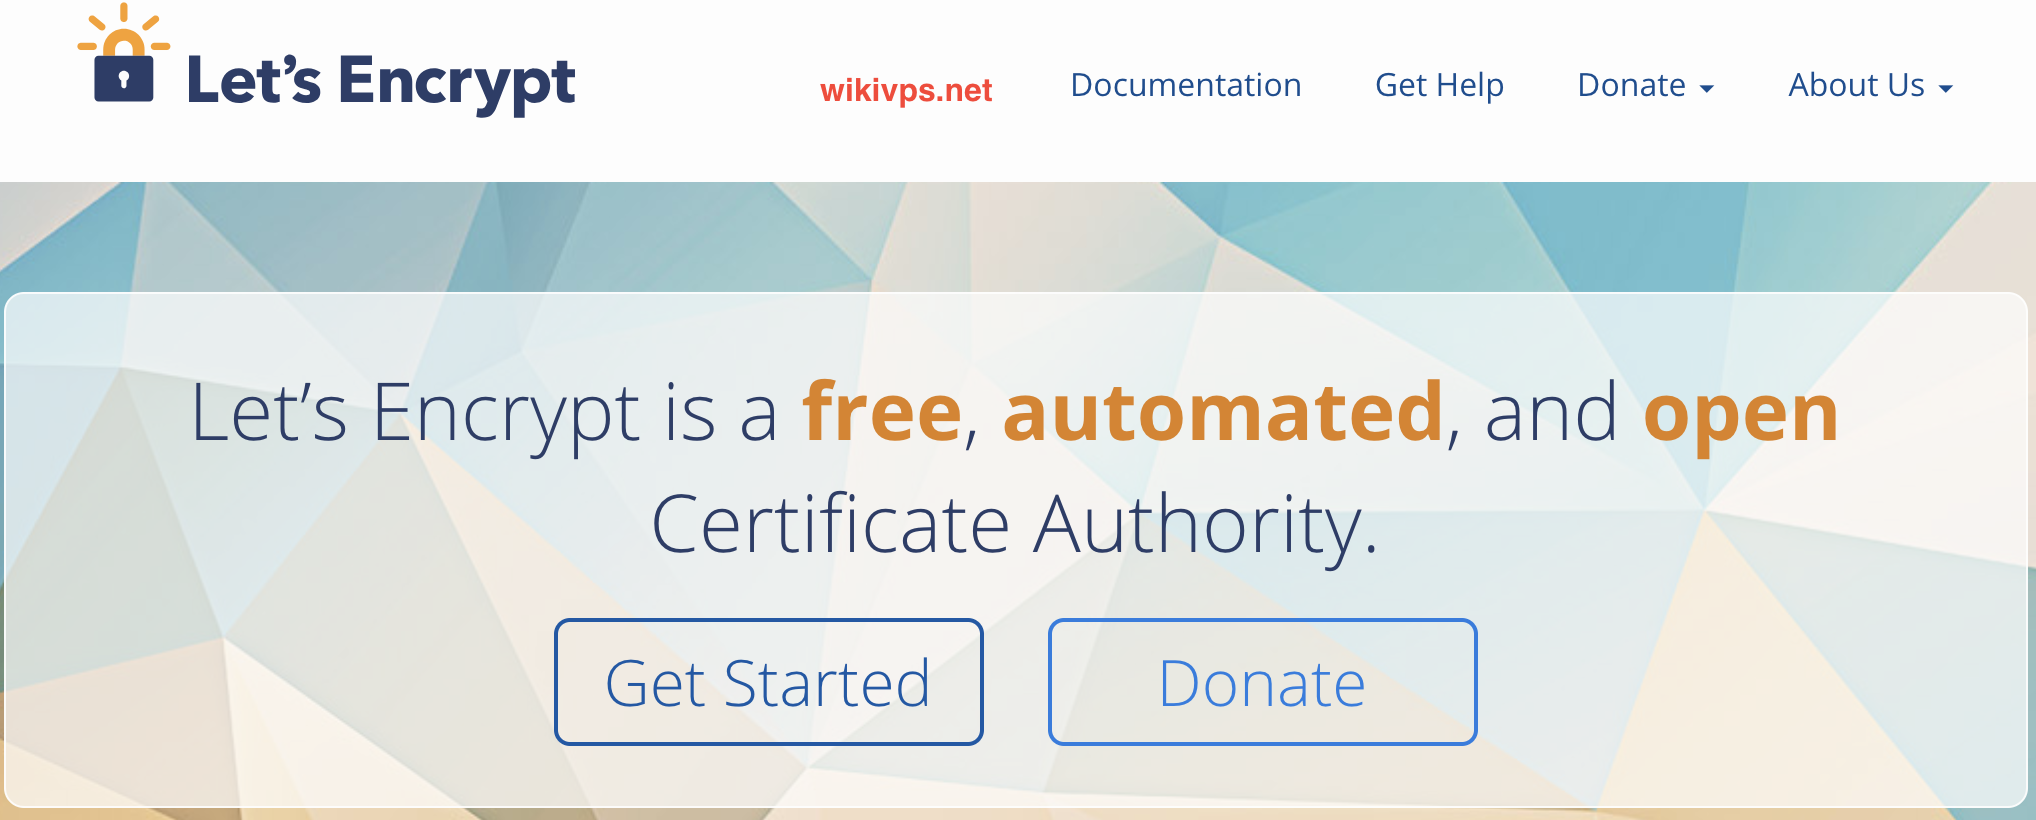 wikivps-let's encrypt